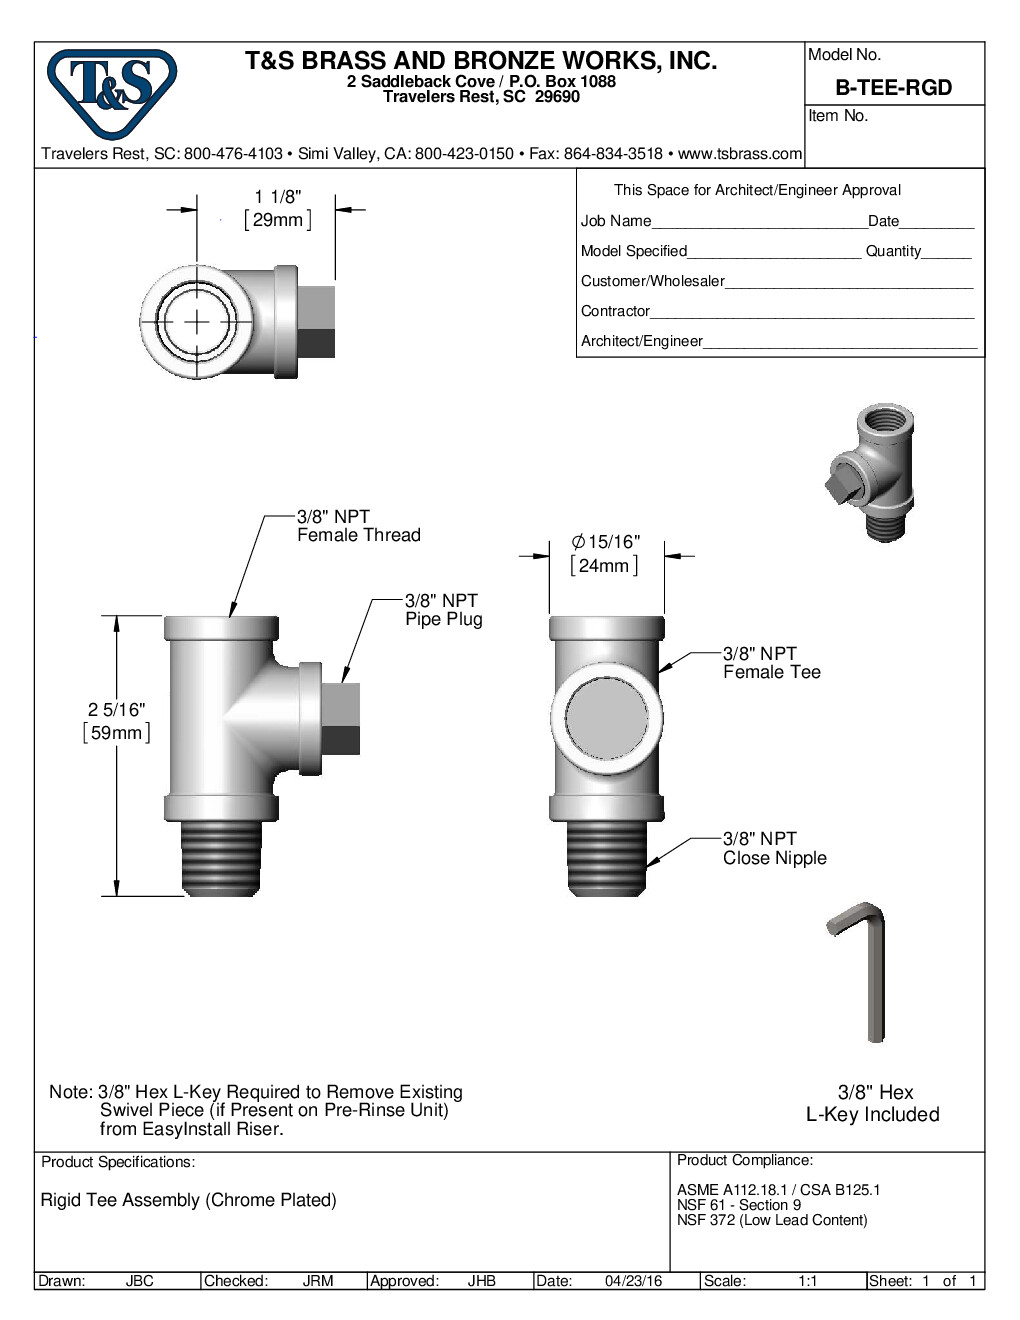 T&S Brass B-TEE-RGD Parts Faucet